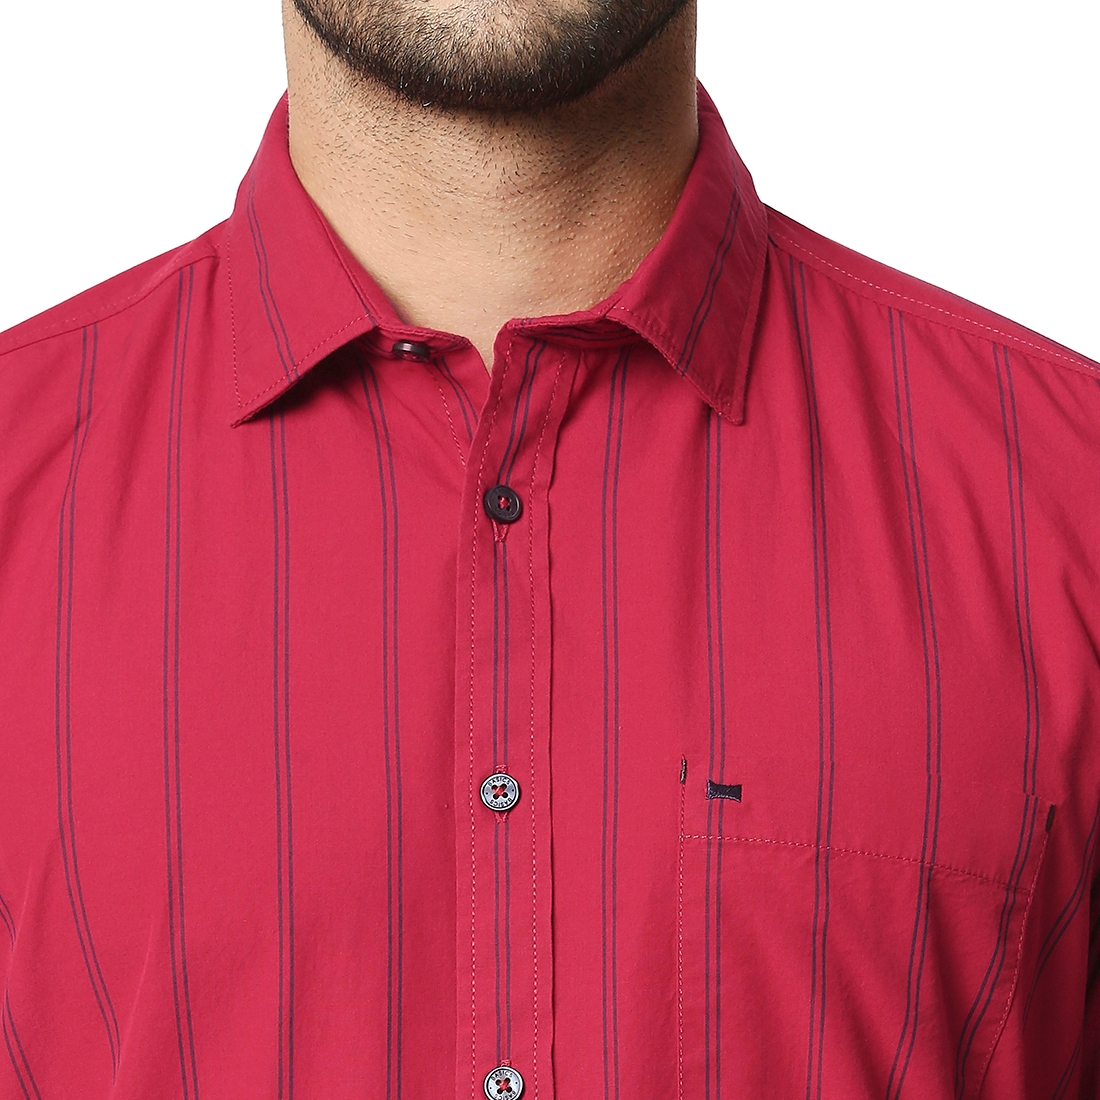 Basics | Men's Red Cotton Striped Casual Shirt 3